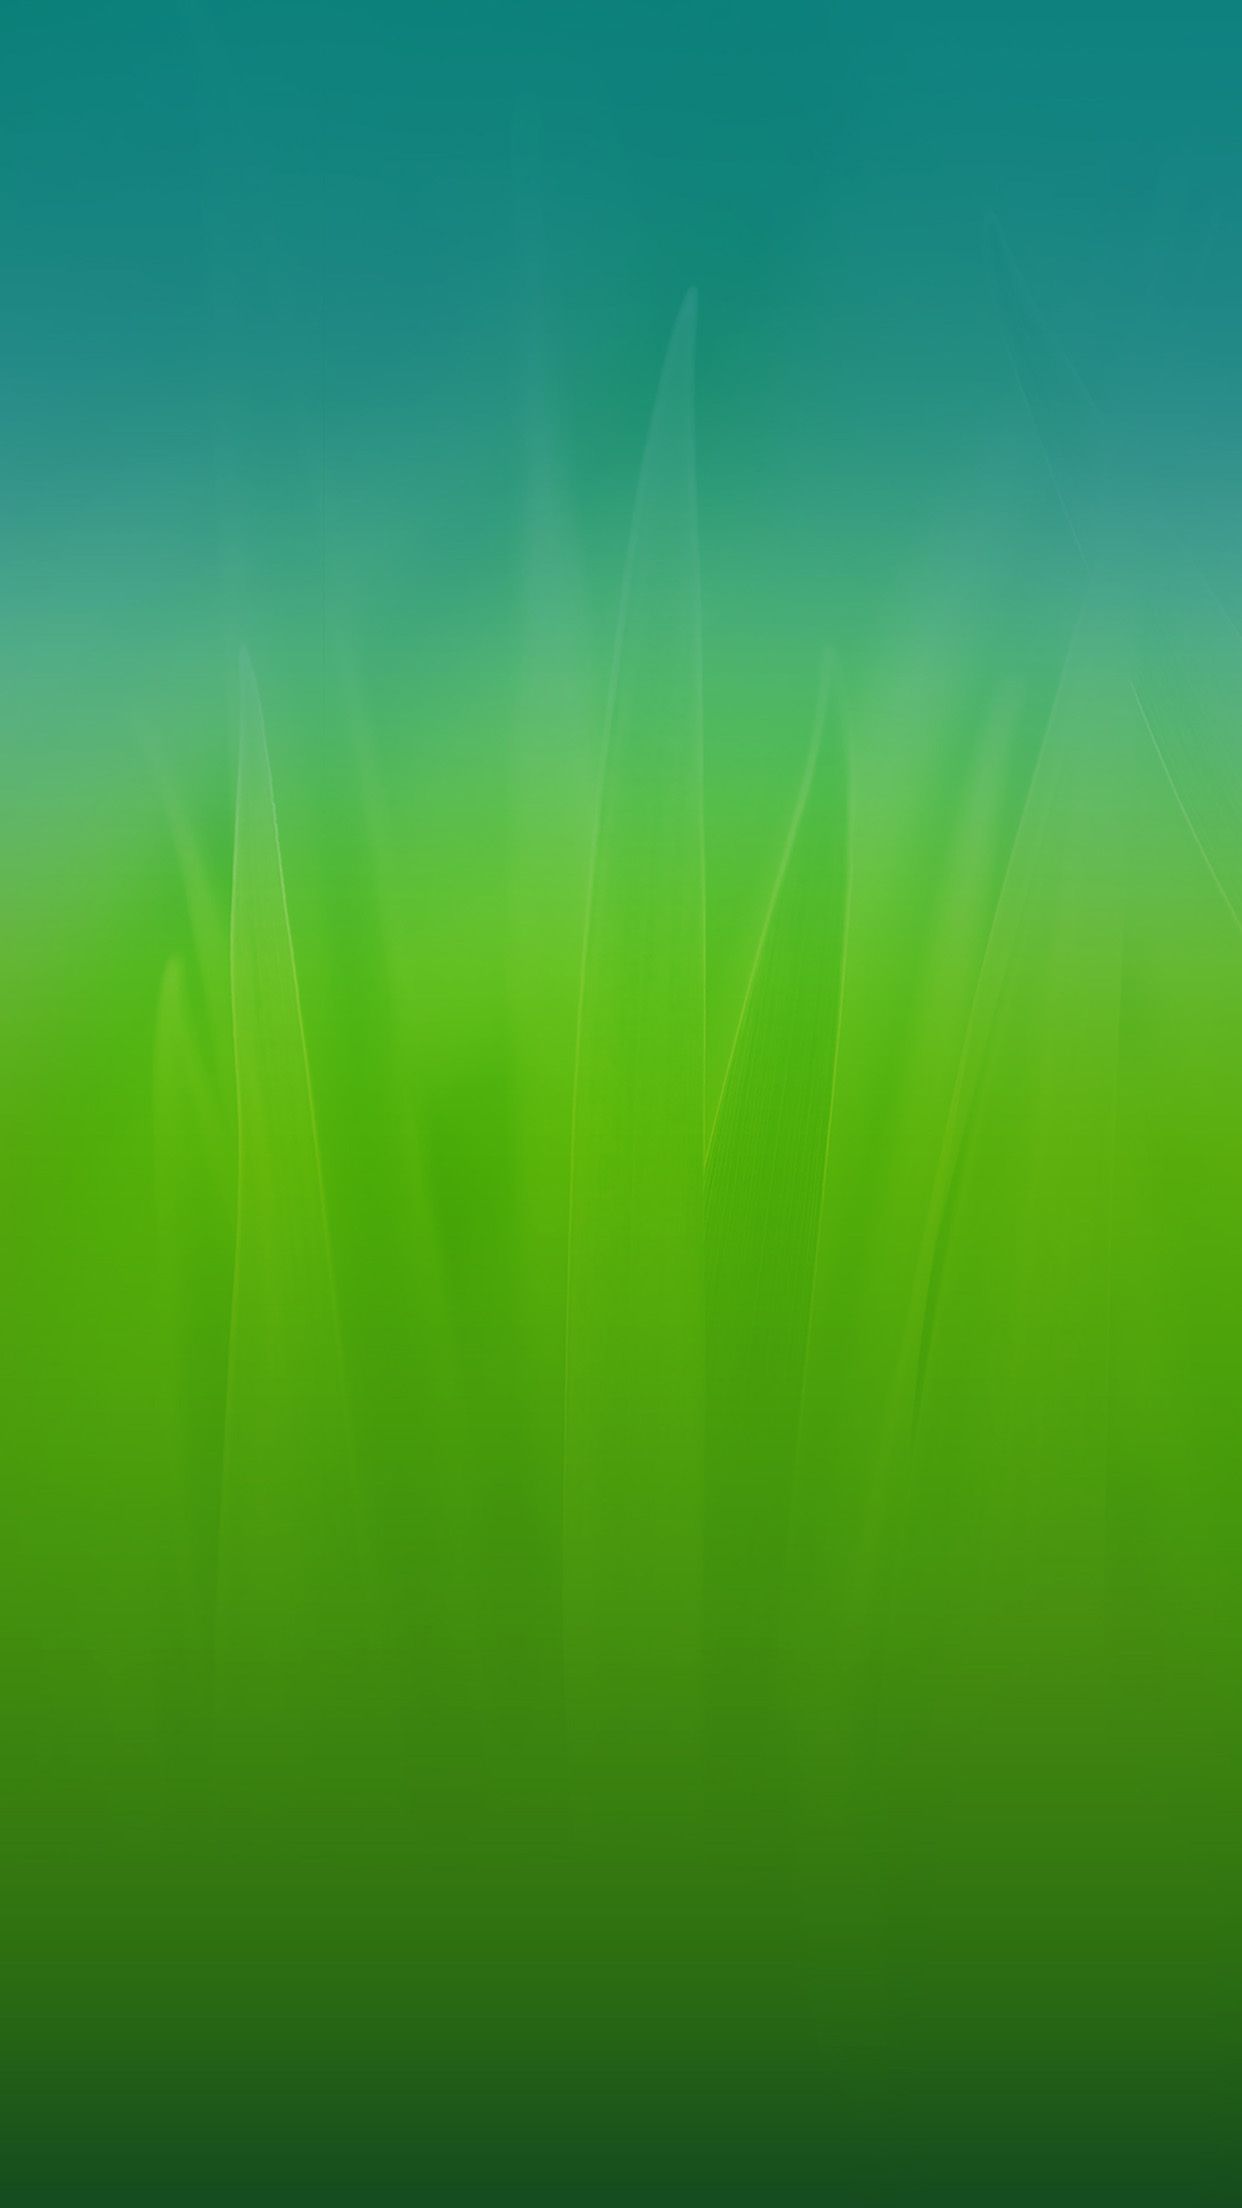 Soft Blue Nature Green Blue Leaf Pattern Android Wallpaper